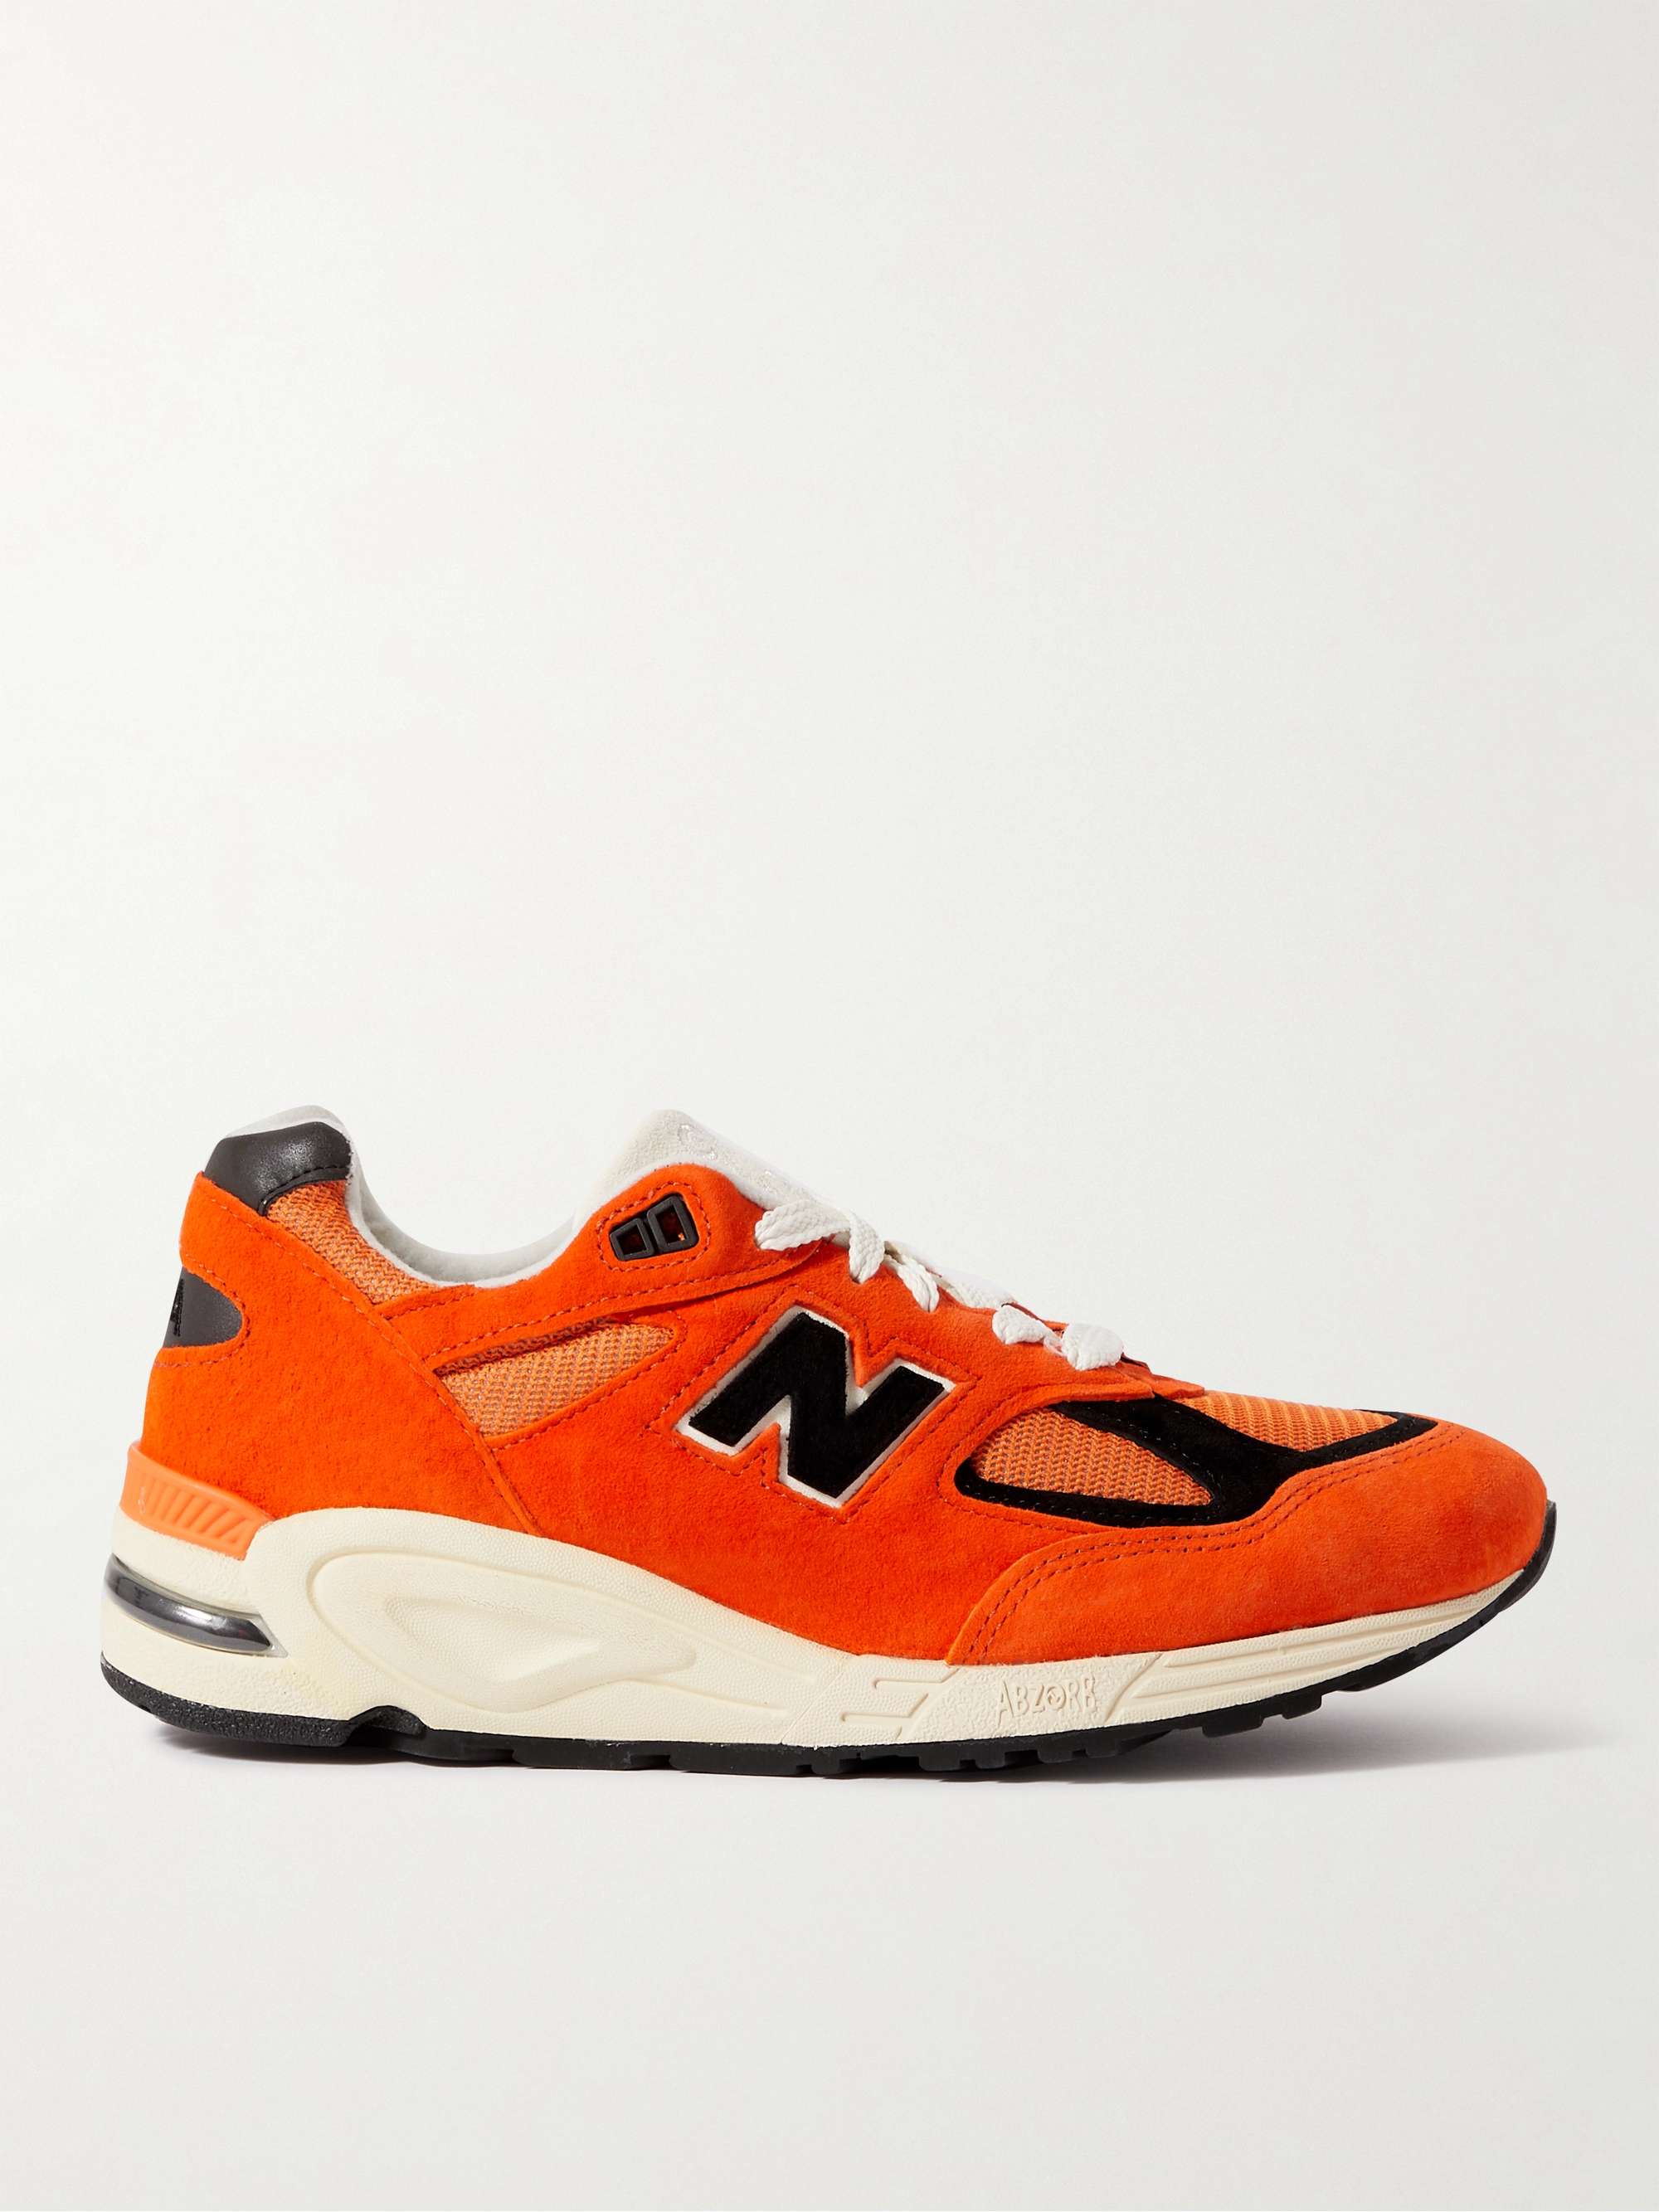 Orange MADE in USA 990v2 Mesh and Suede Sneakers | NEW BALANCE | MR PORTER